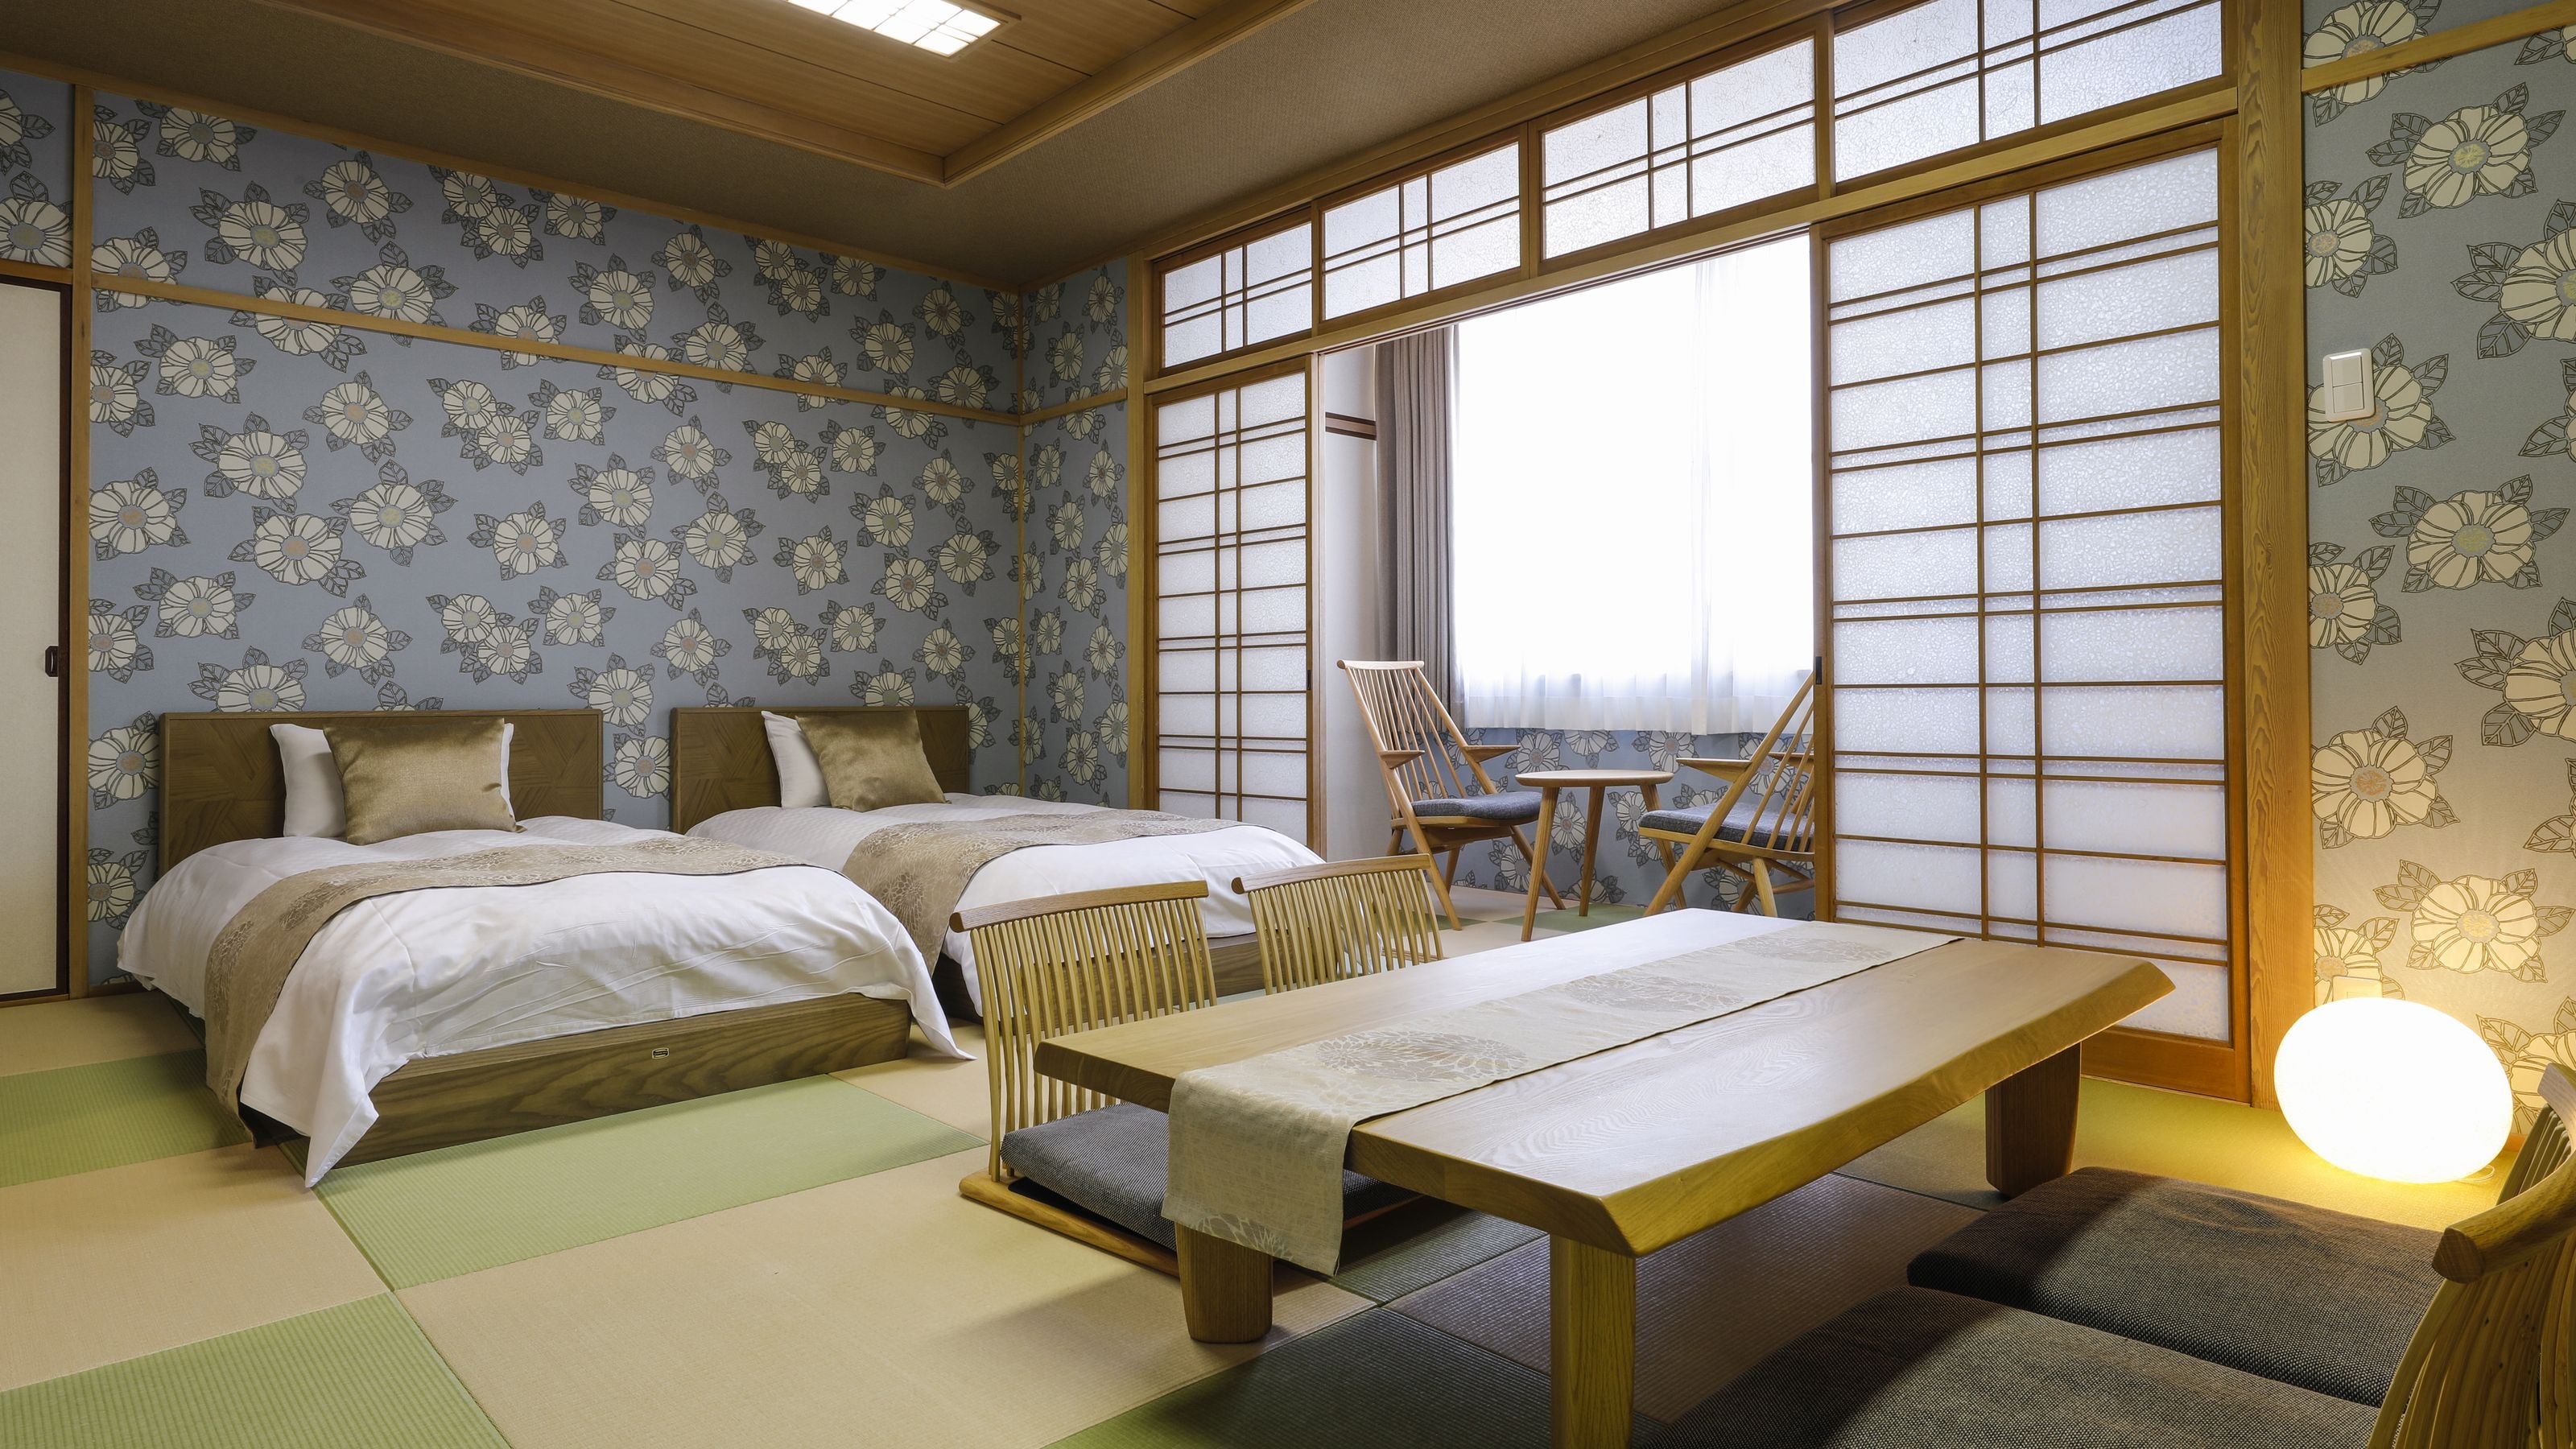 * DX Japanese-style room Example: Simmons bed is placed in a spacious Japanese-style room